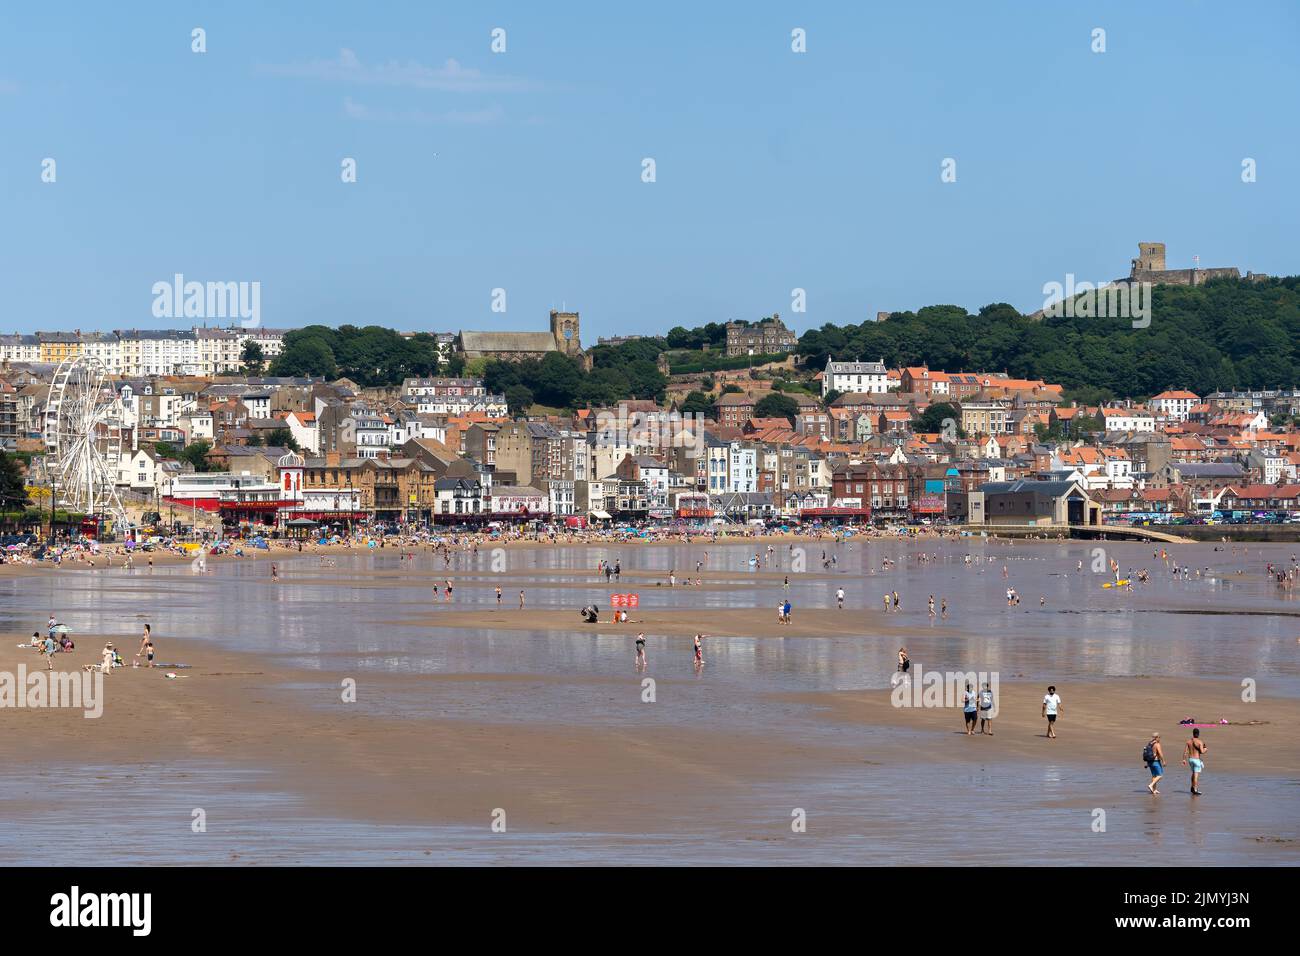 SCARBOROUGH,  NORTH YORKSHIRE, UK - JULY 18: View of the sea front in Scarborough, North Yorkshire on July 18, 2022. Unidentifie Stock Photo